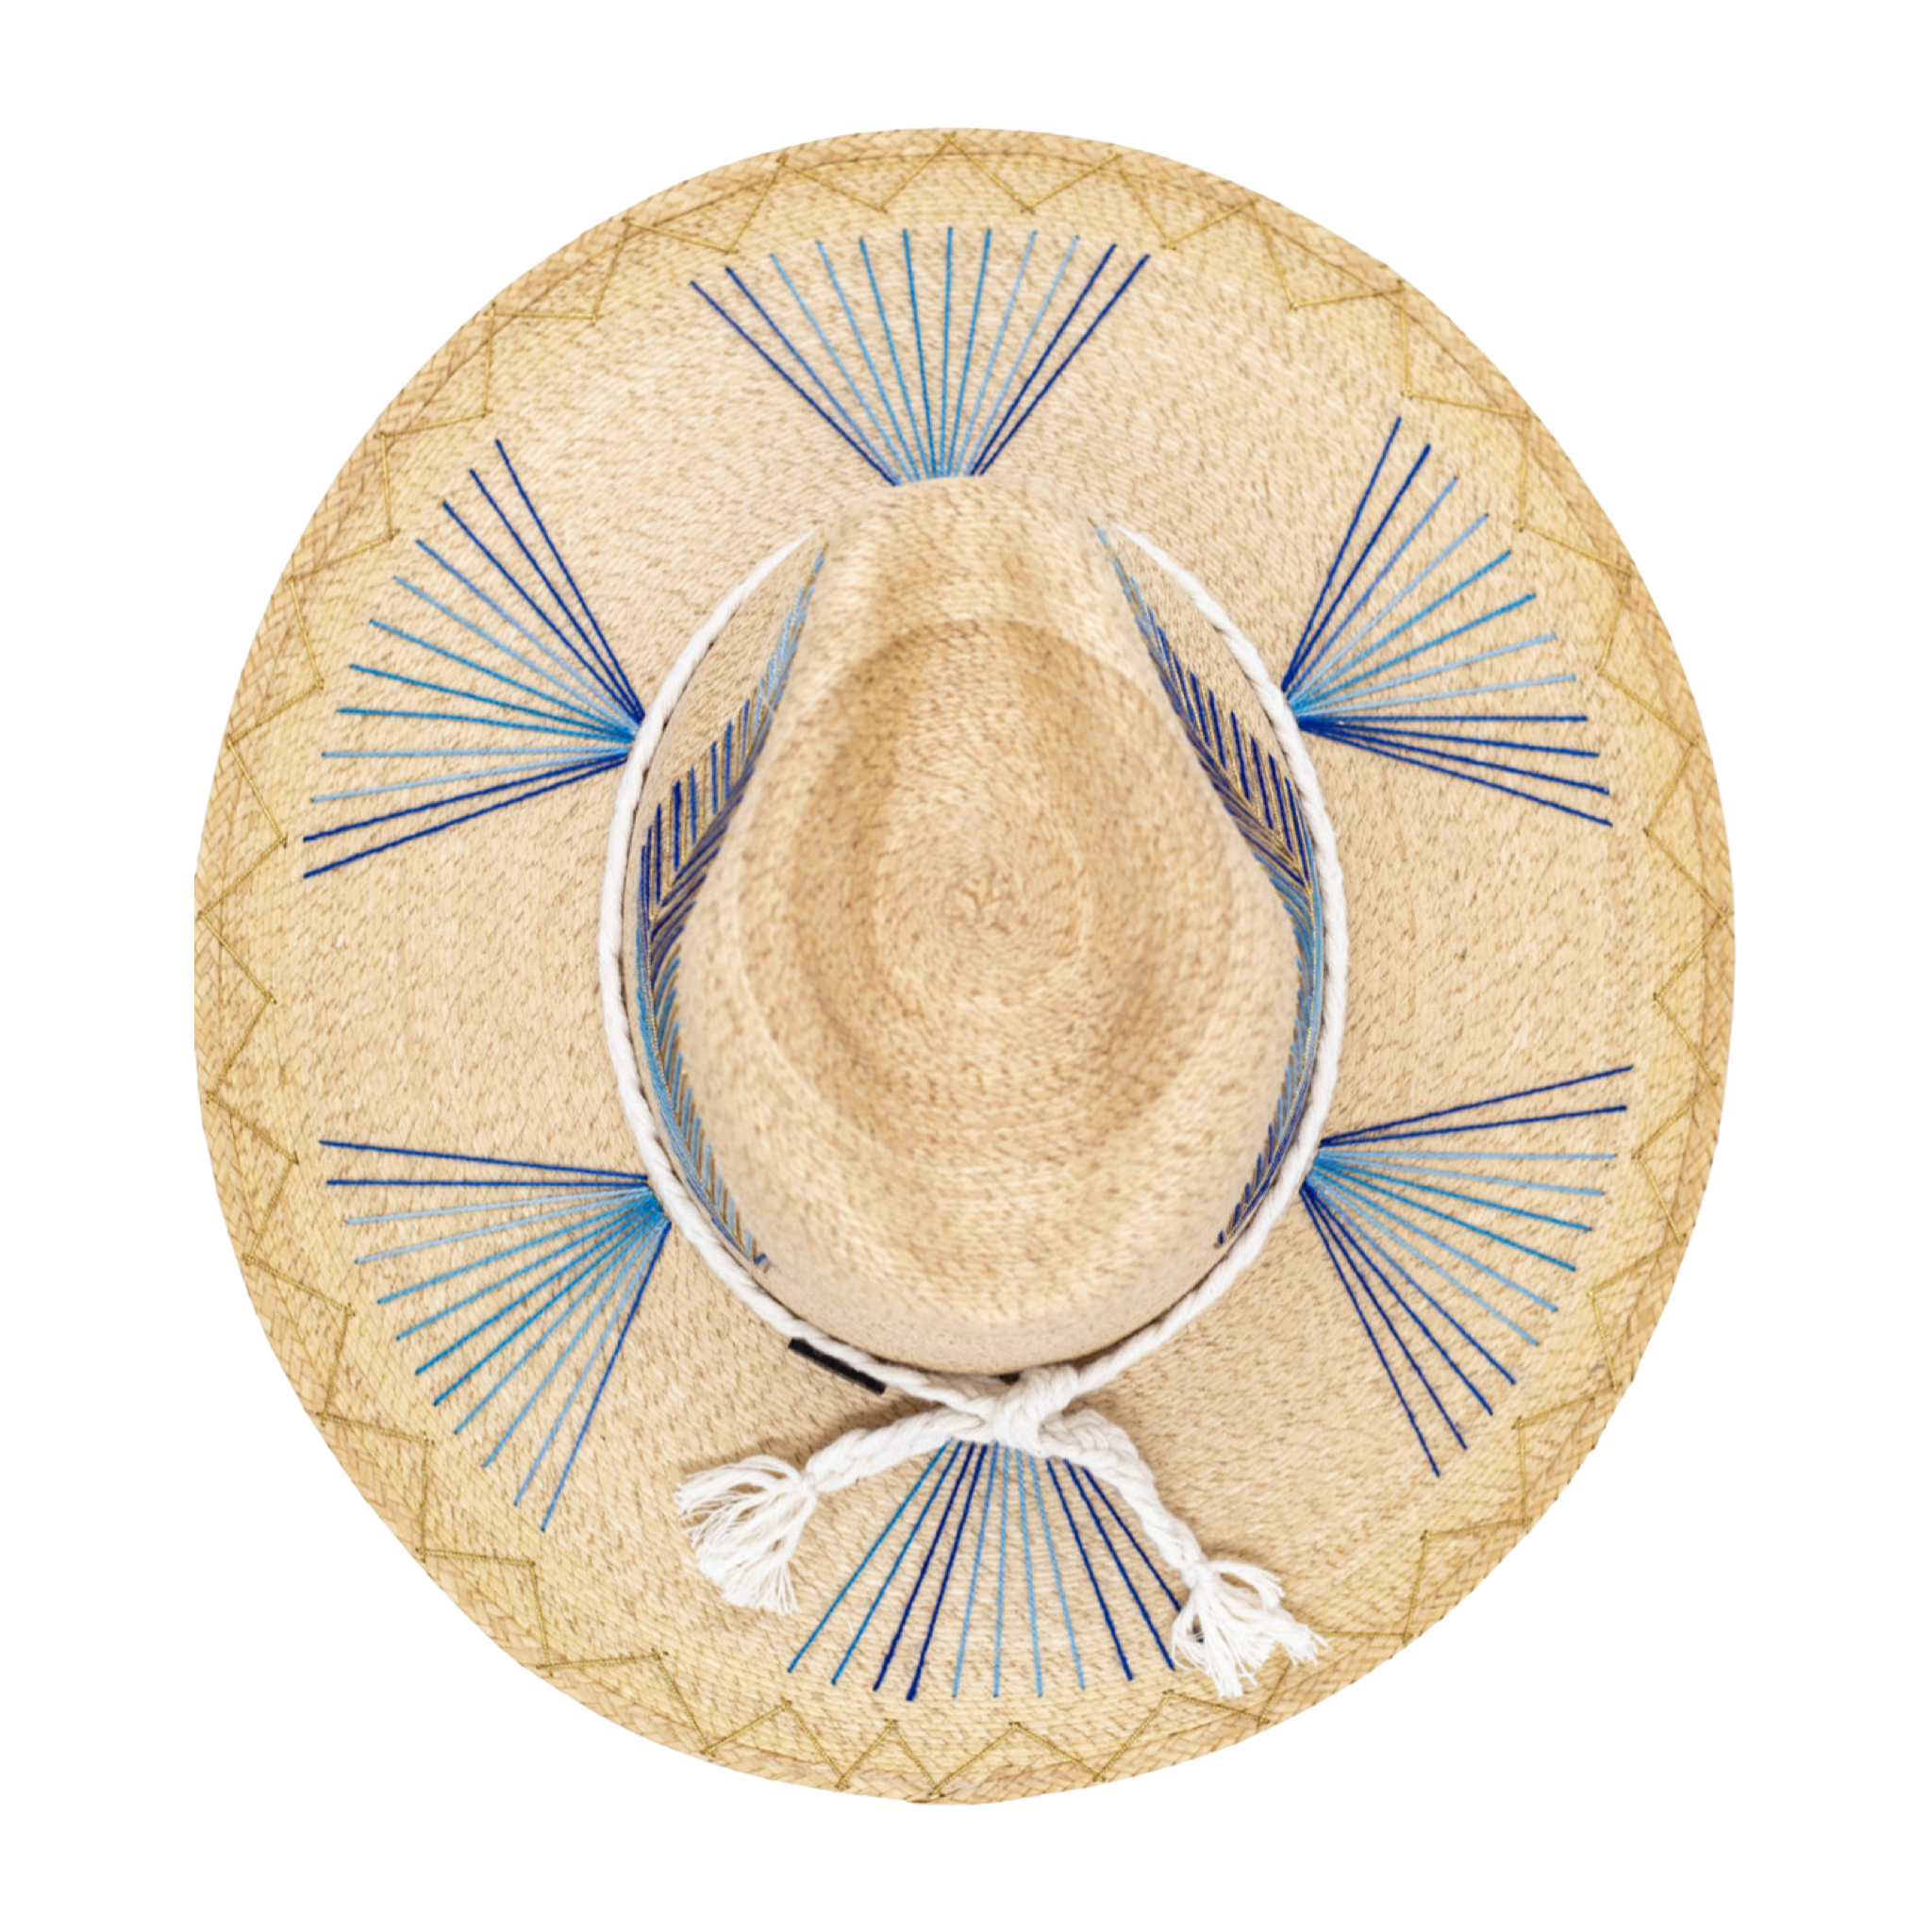 Exclusive Blue Feather, Natural Palm Hat by Corazon Playero